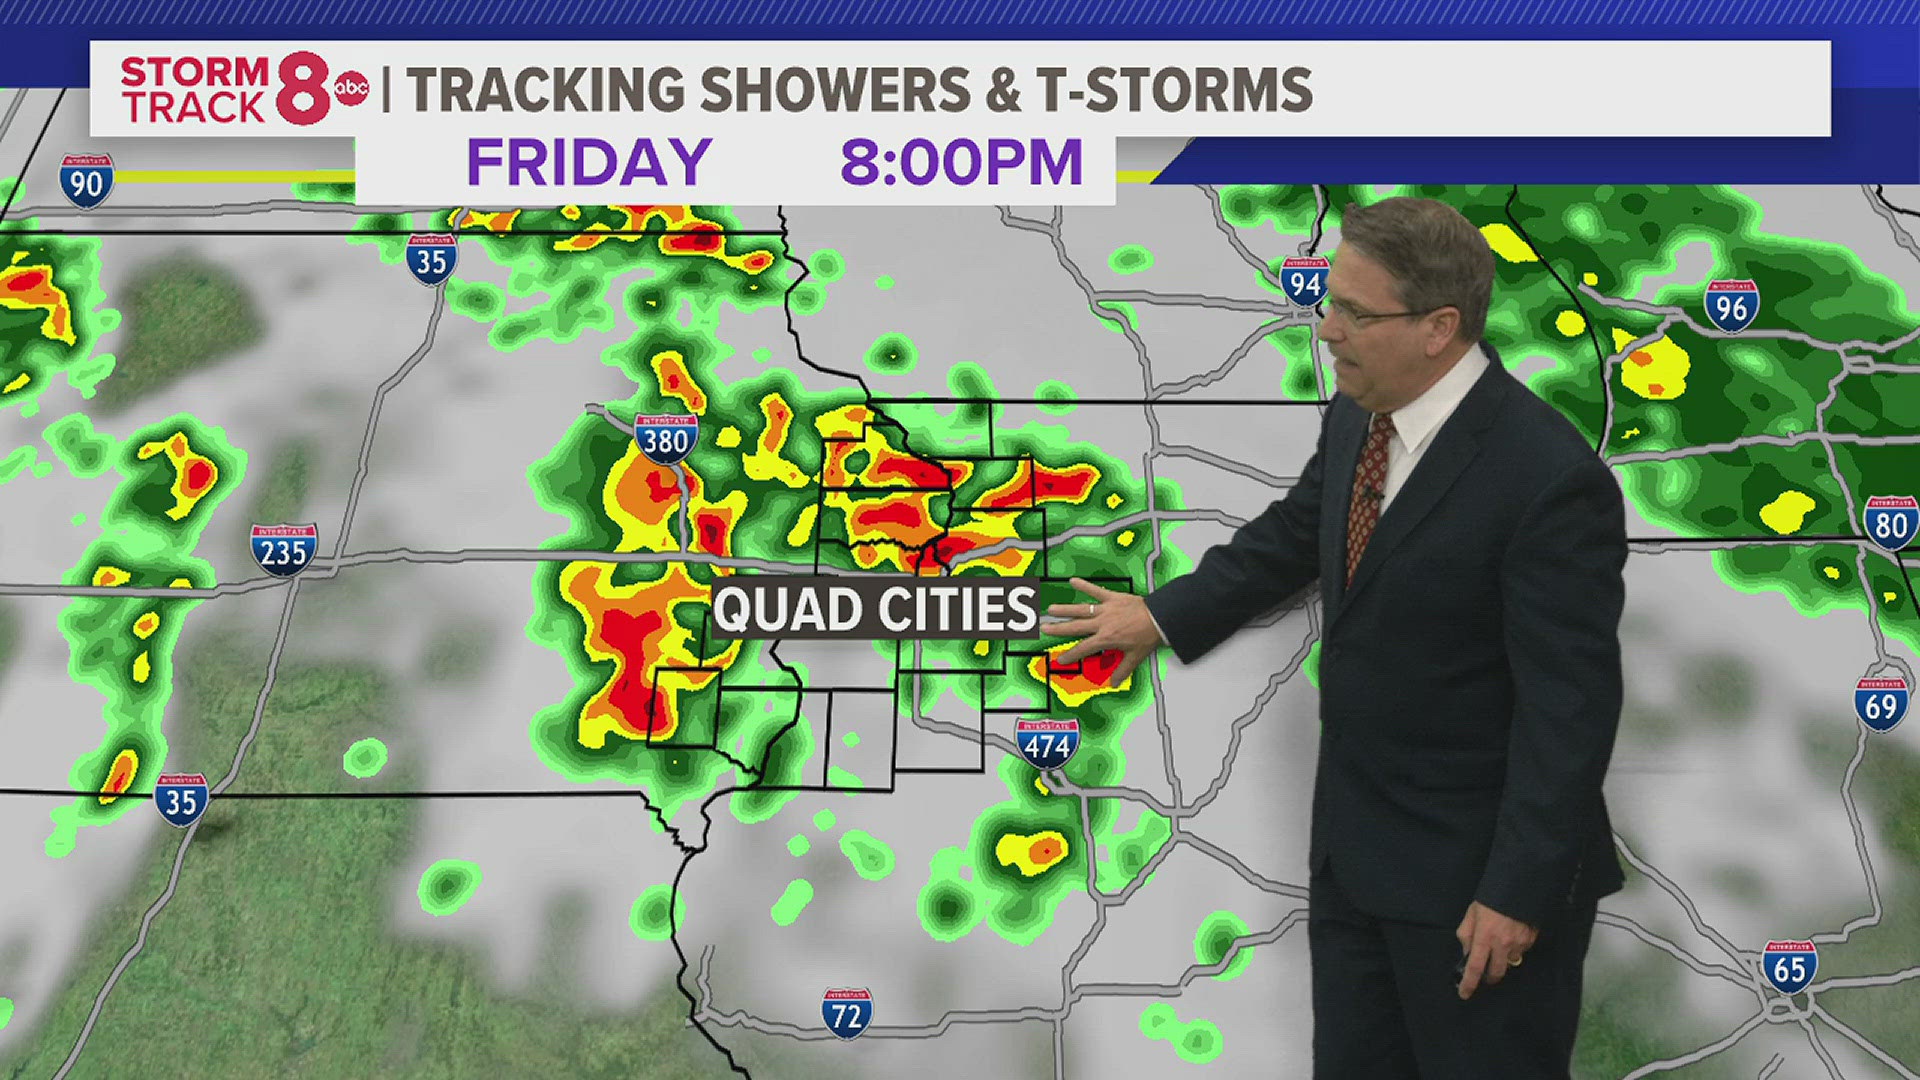 Scattered showers developing from west to east Friday morning